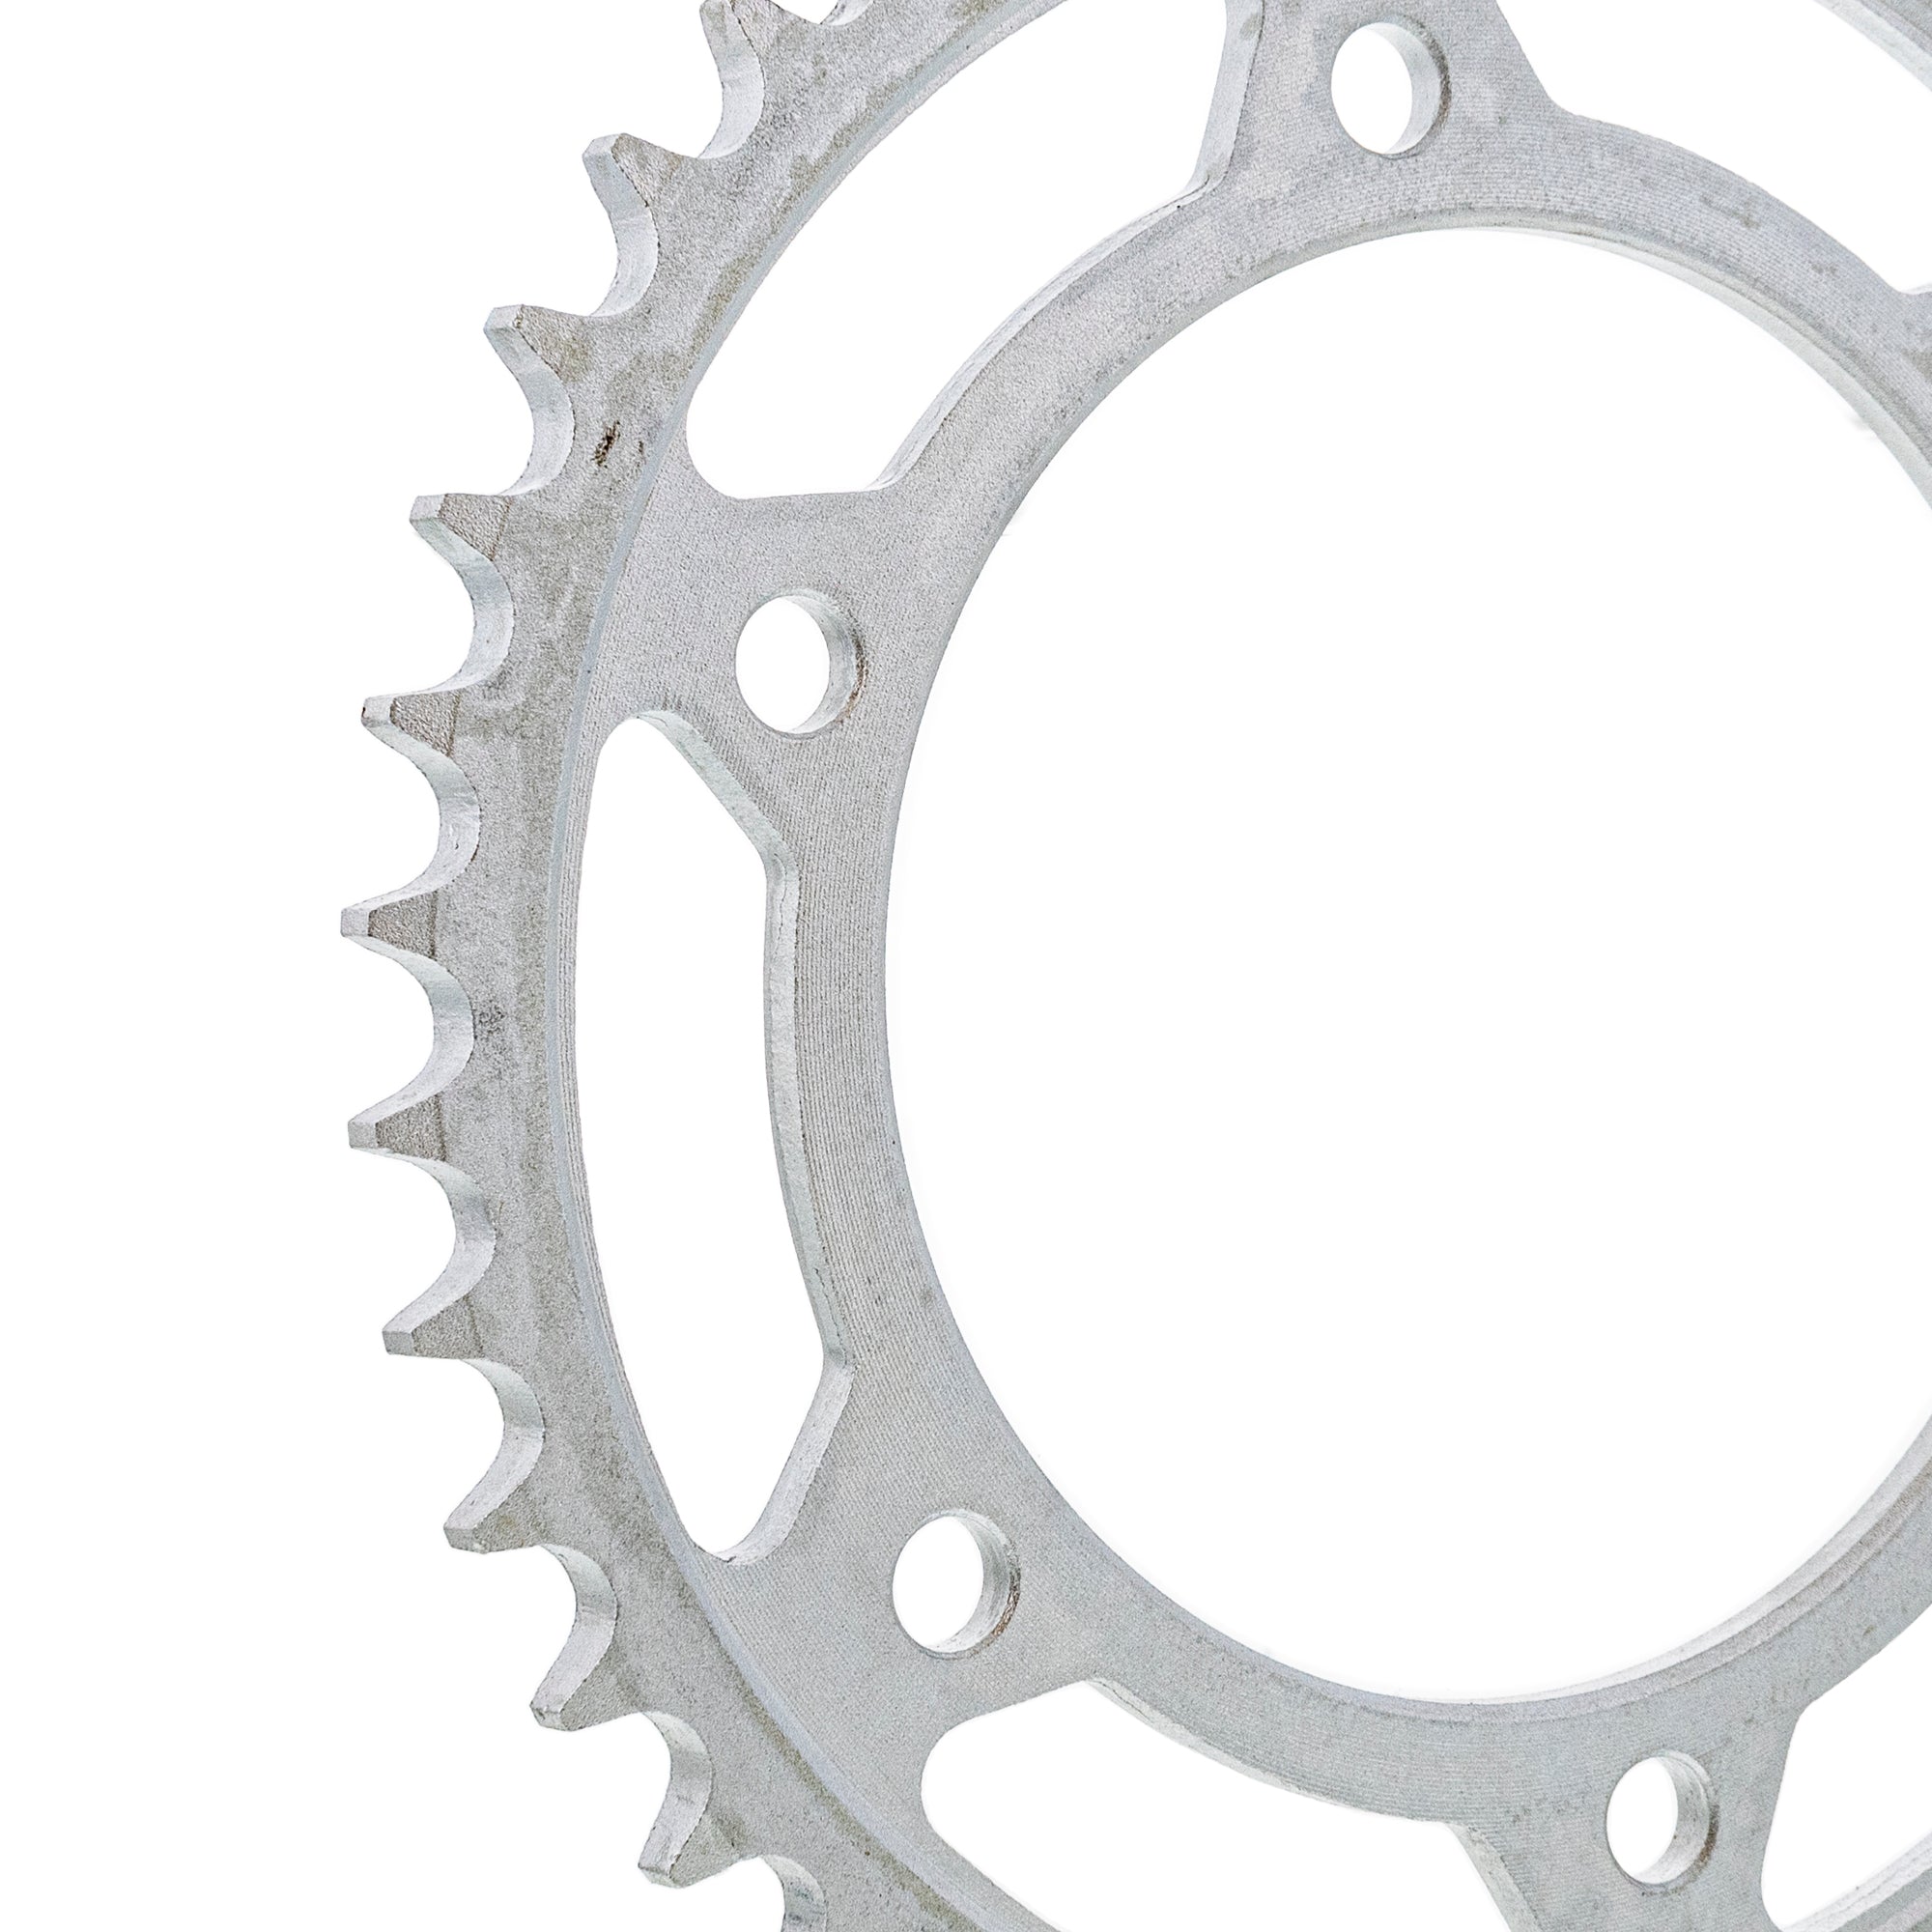 525 Pitch 42 Tooth Rear Drive Sprocket for KTM 1290 1190 990 1090 950